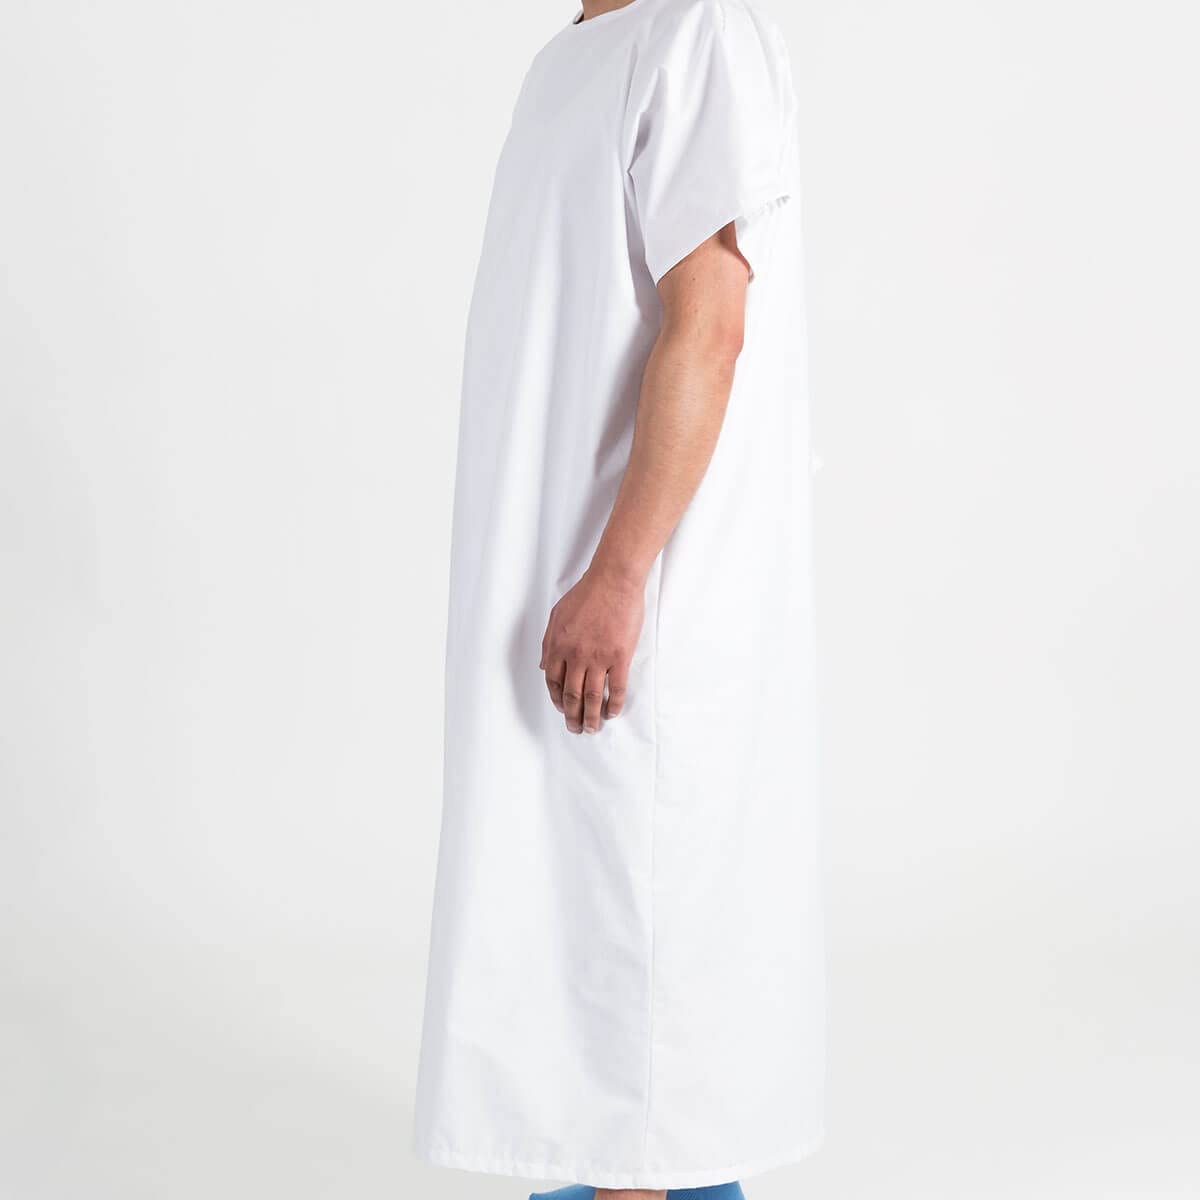 Hospital Patient Operation Gown One Size, Unisex Fit, Opening at Back - As Used by The NHS, White With Diamond Pattern, White With Diamond Pattern